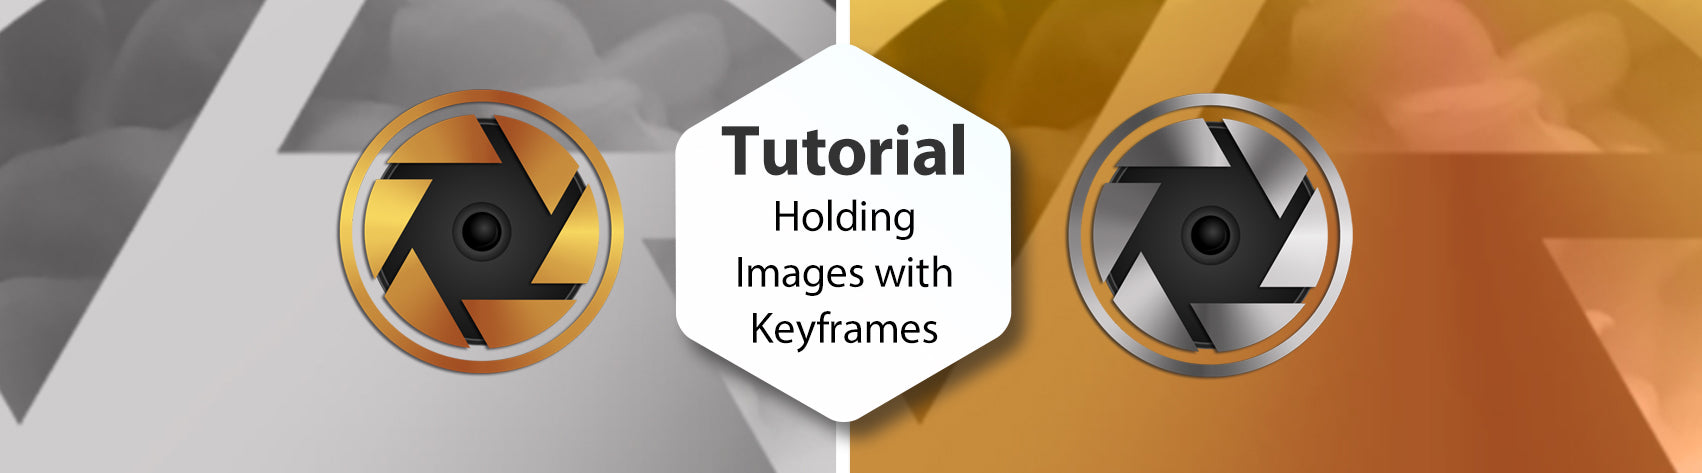 Tutorial - Holding Images with Keyframes